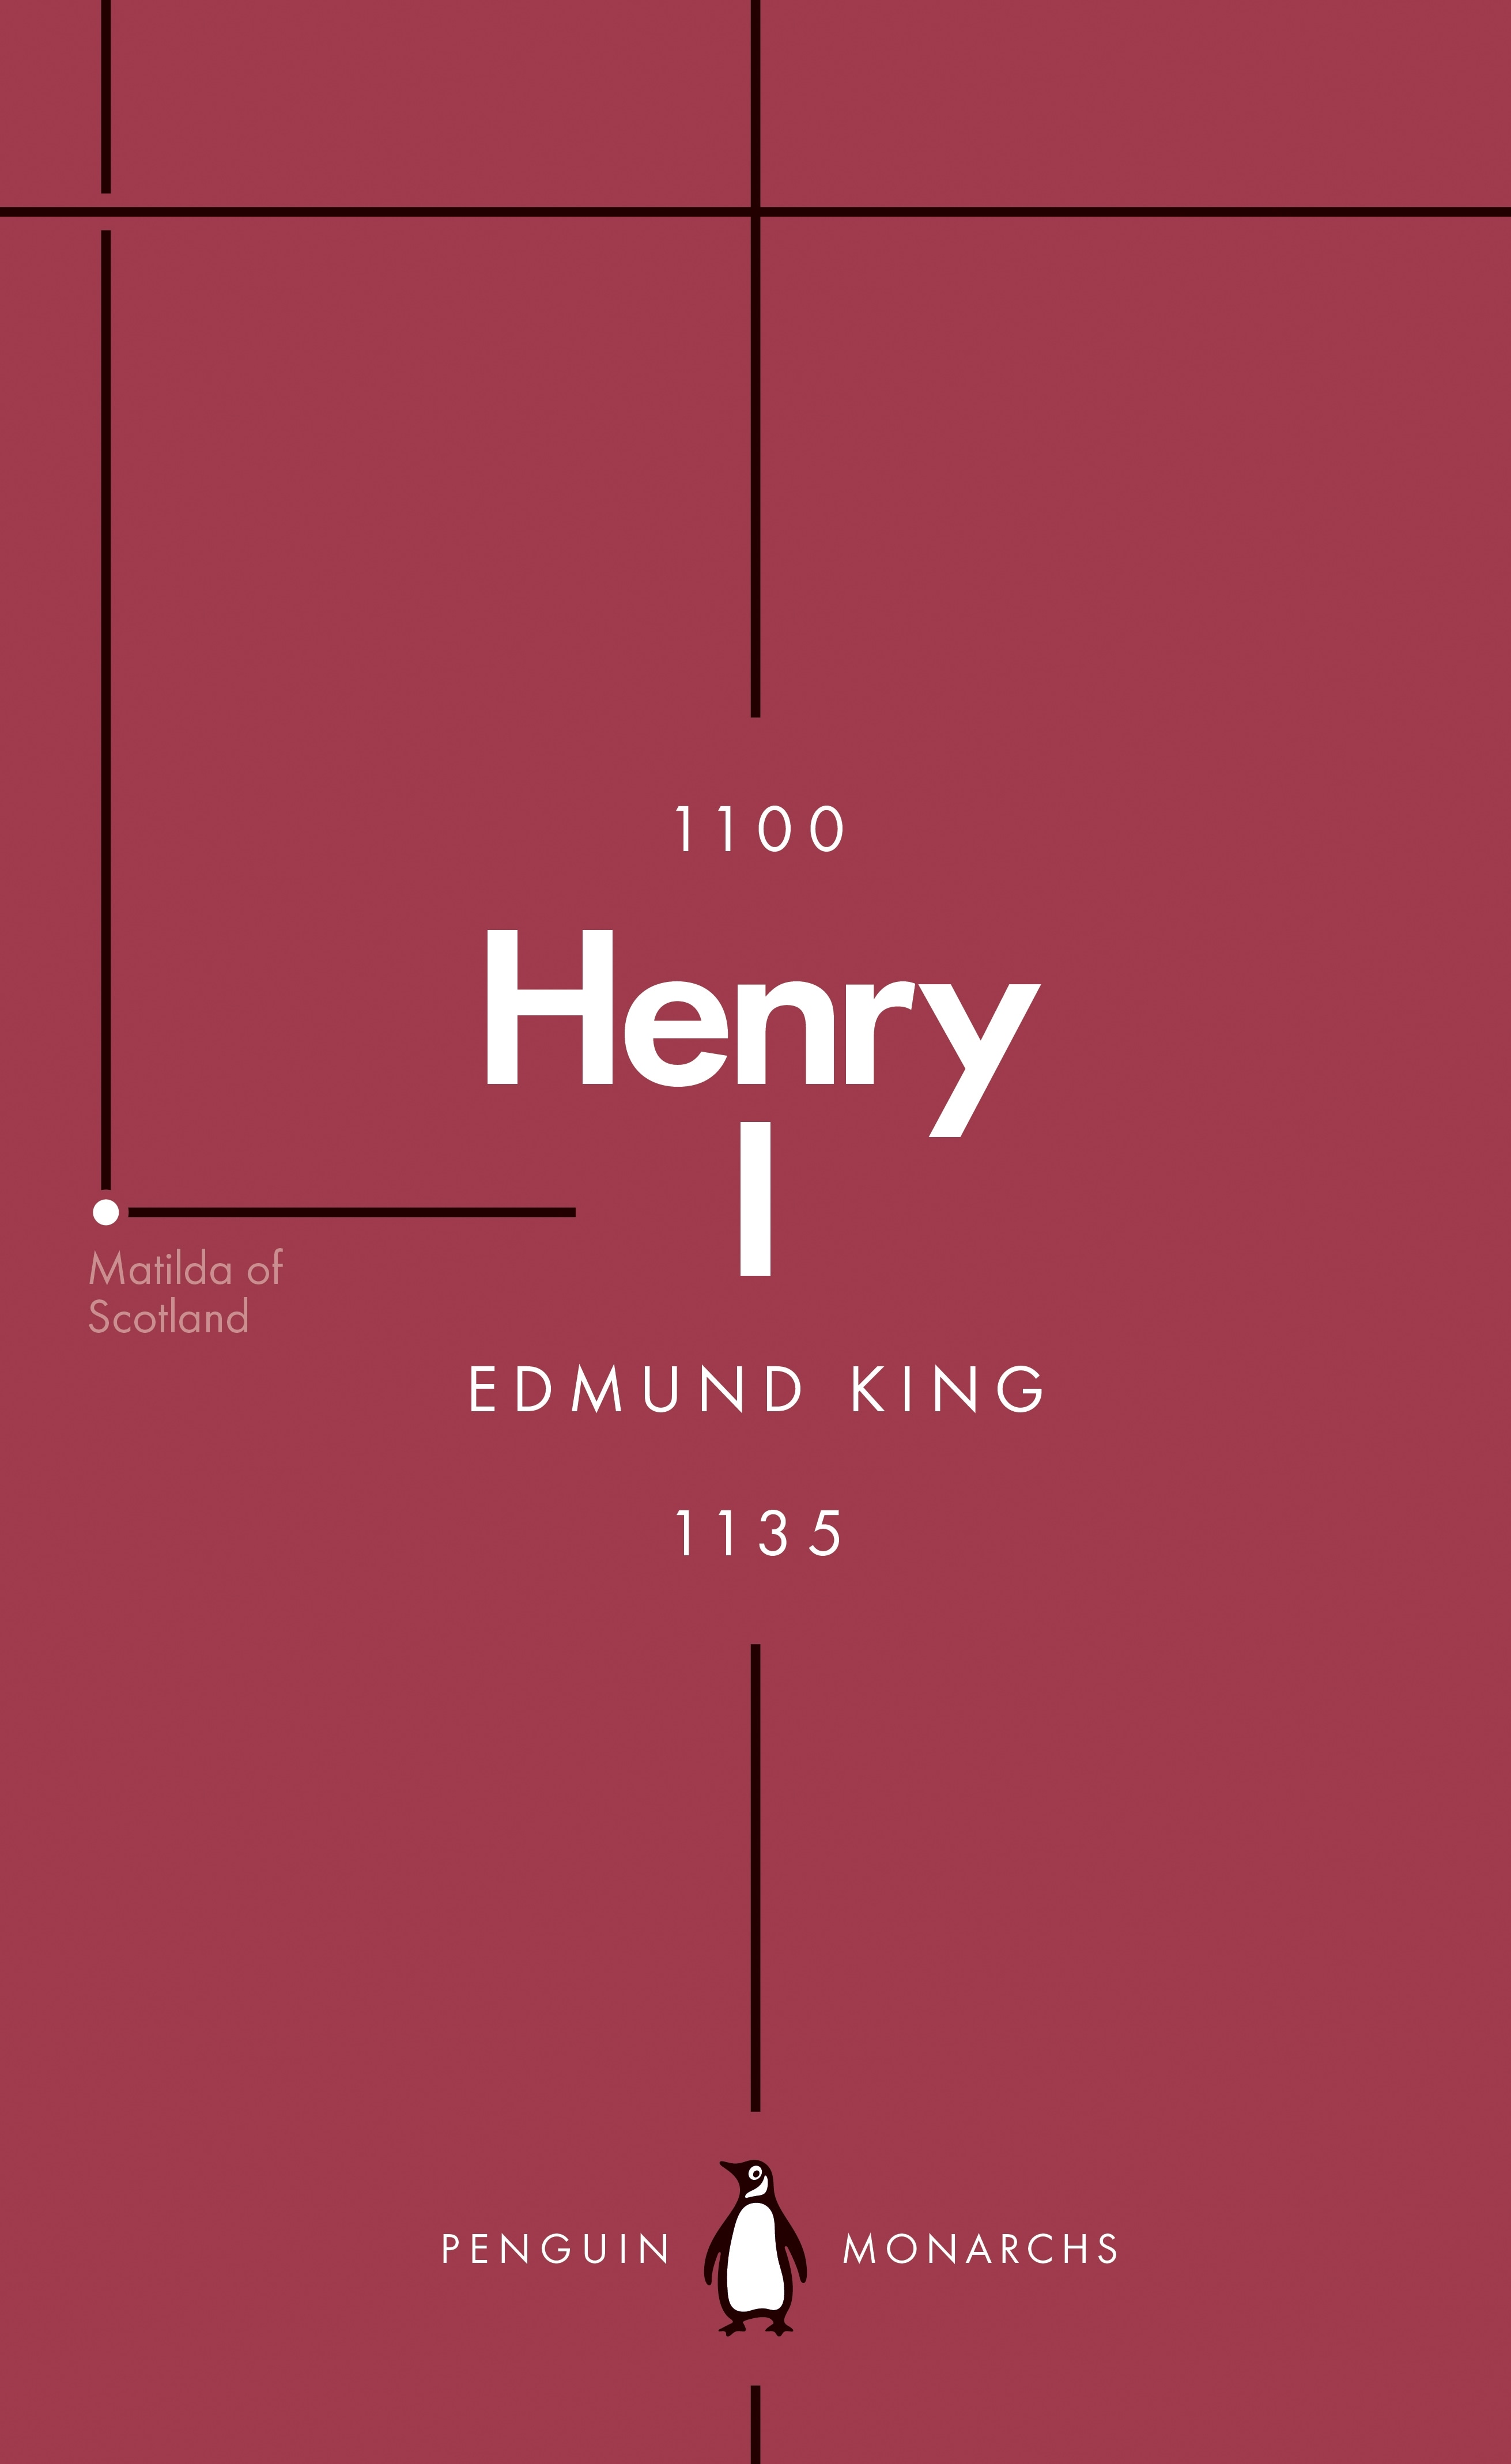 Book “Henry I” by Edmund King — May 5, 2022